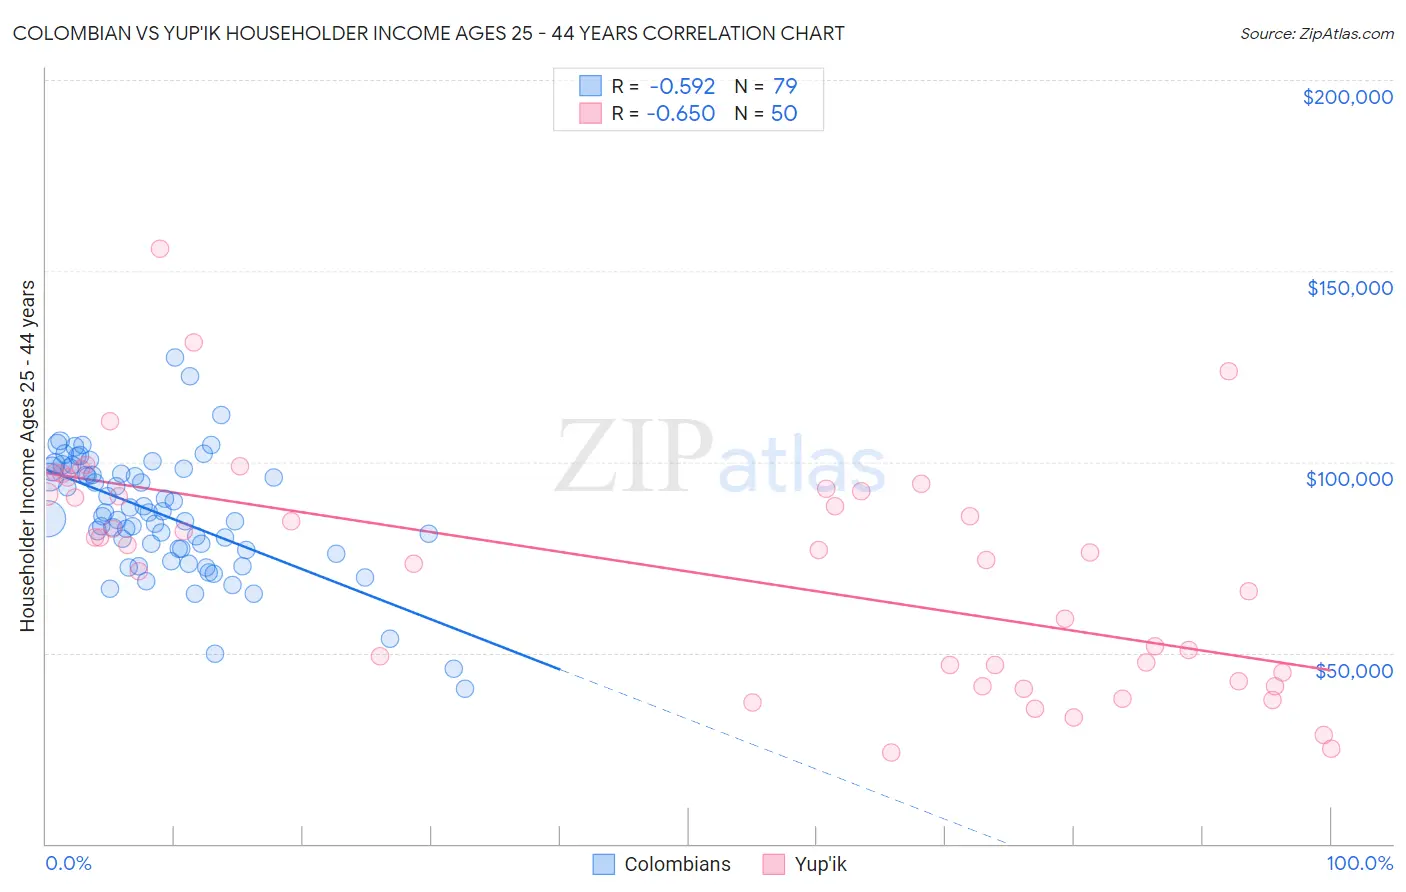 Colombian vs Yup'ik Householder Income Ages 25 - 44 years